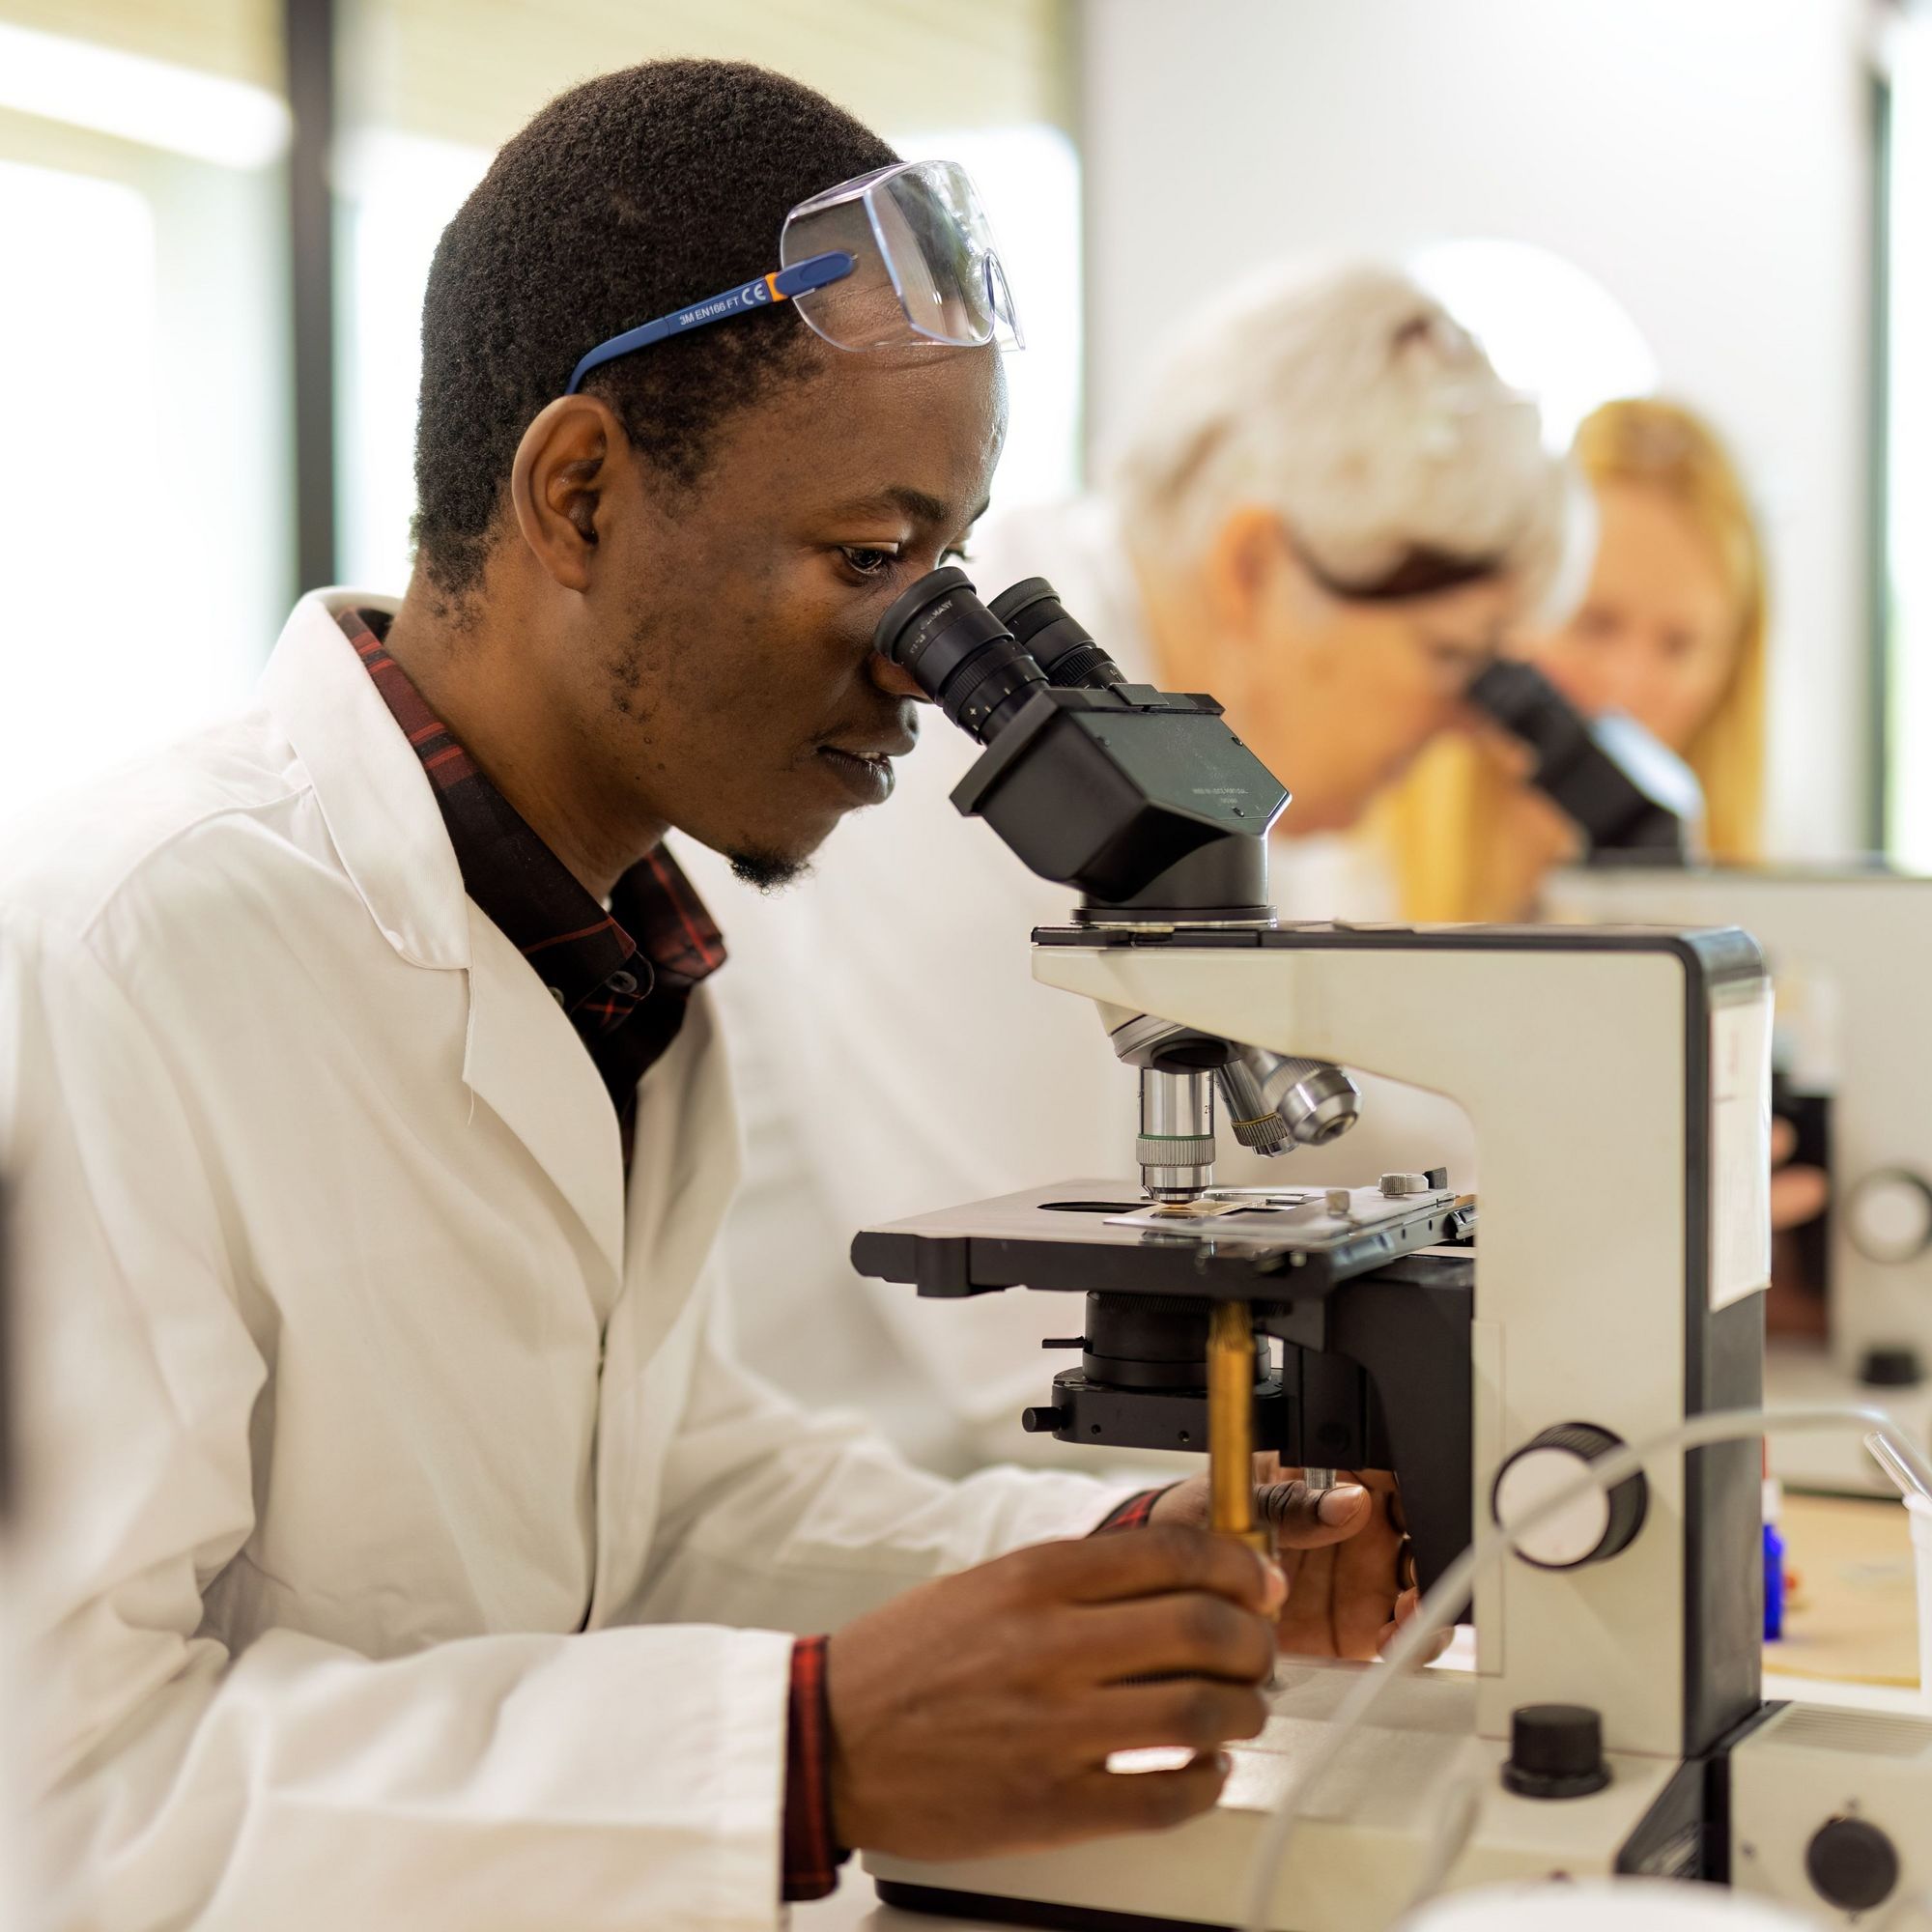 A student attending a short clinical course looks through a microscope